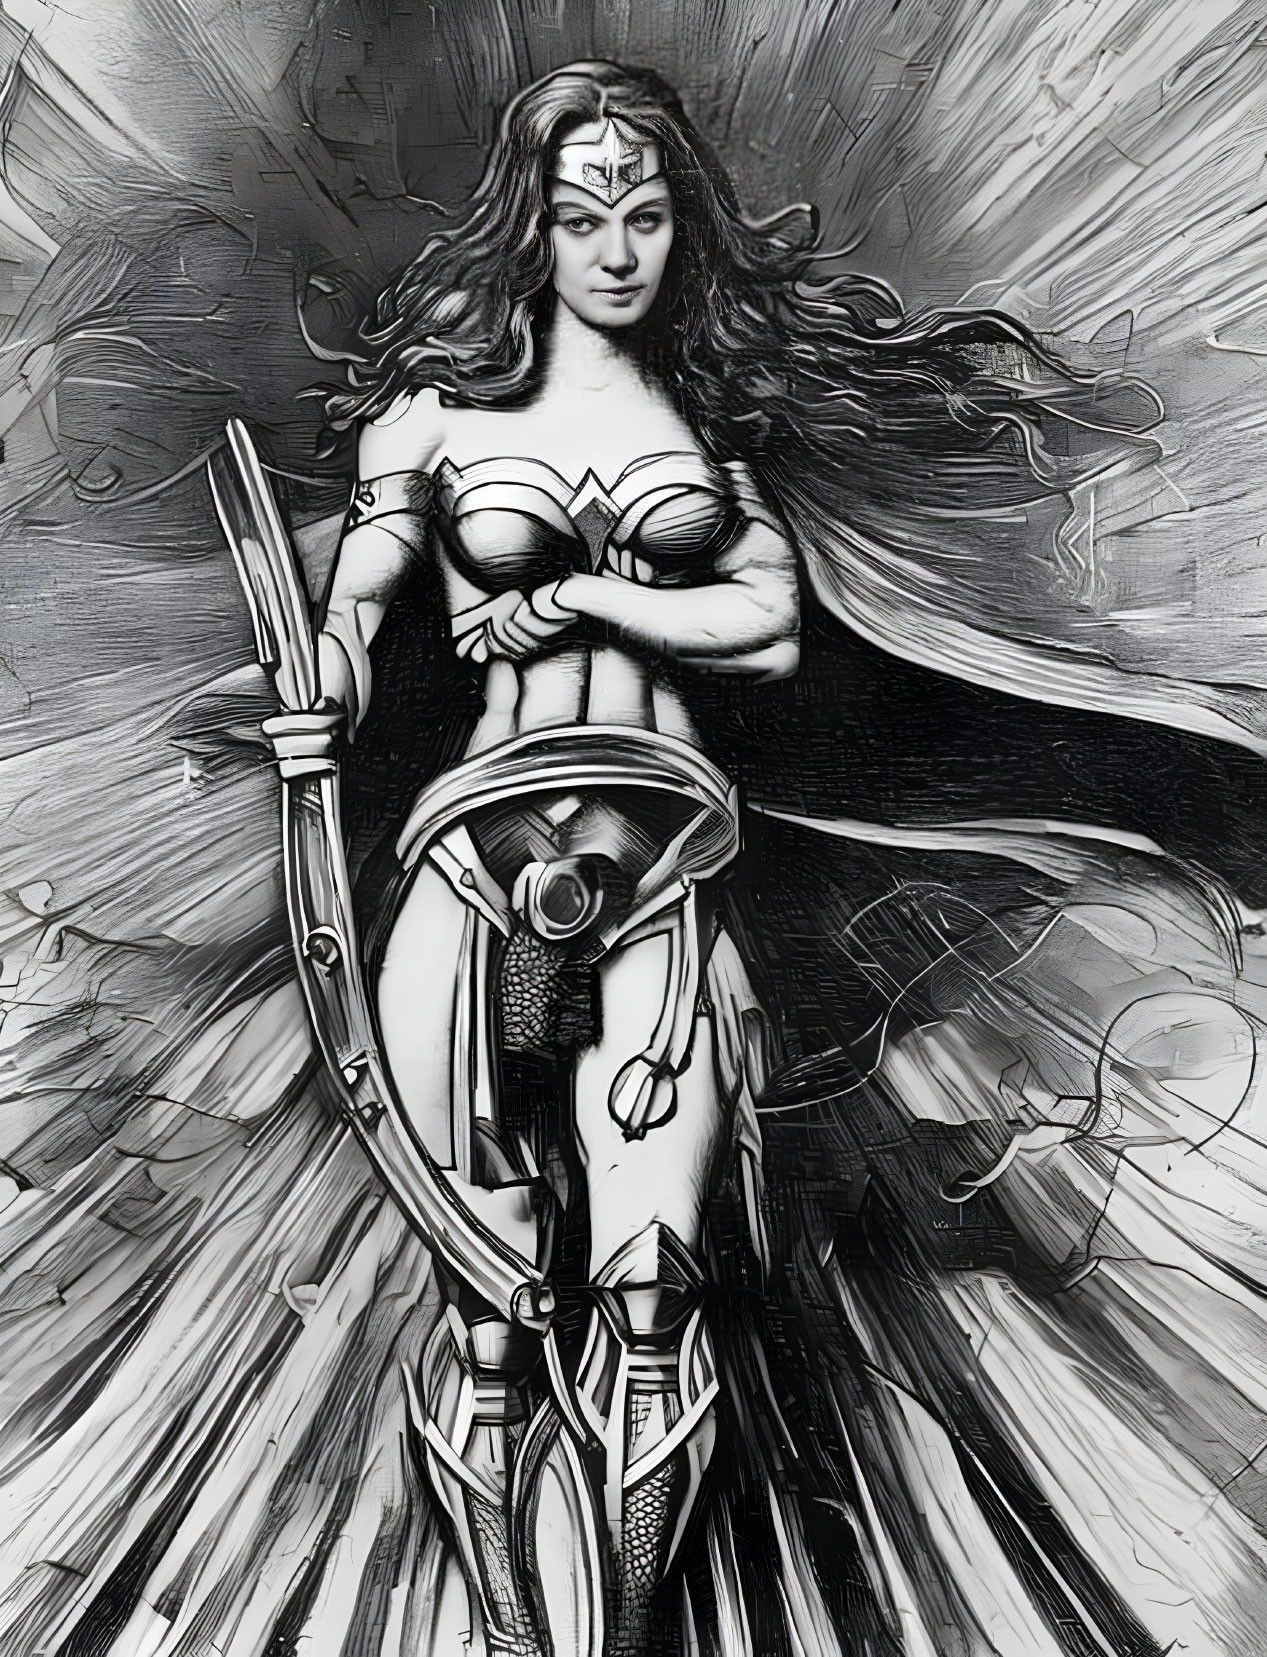 Monochromatic female superhero with tiara, sword, shield, and flowing cape